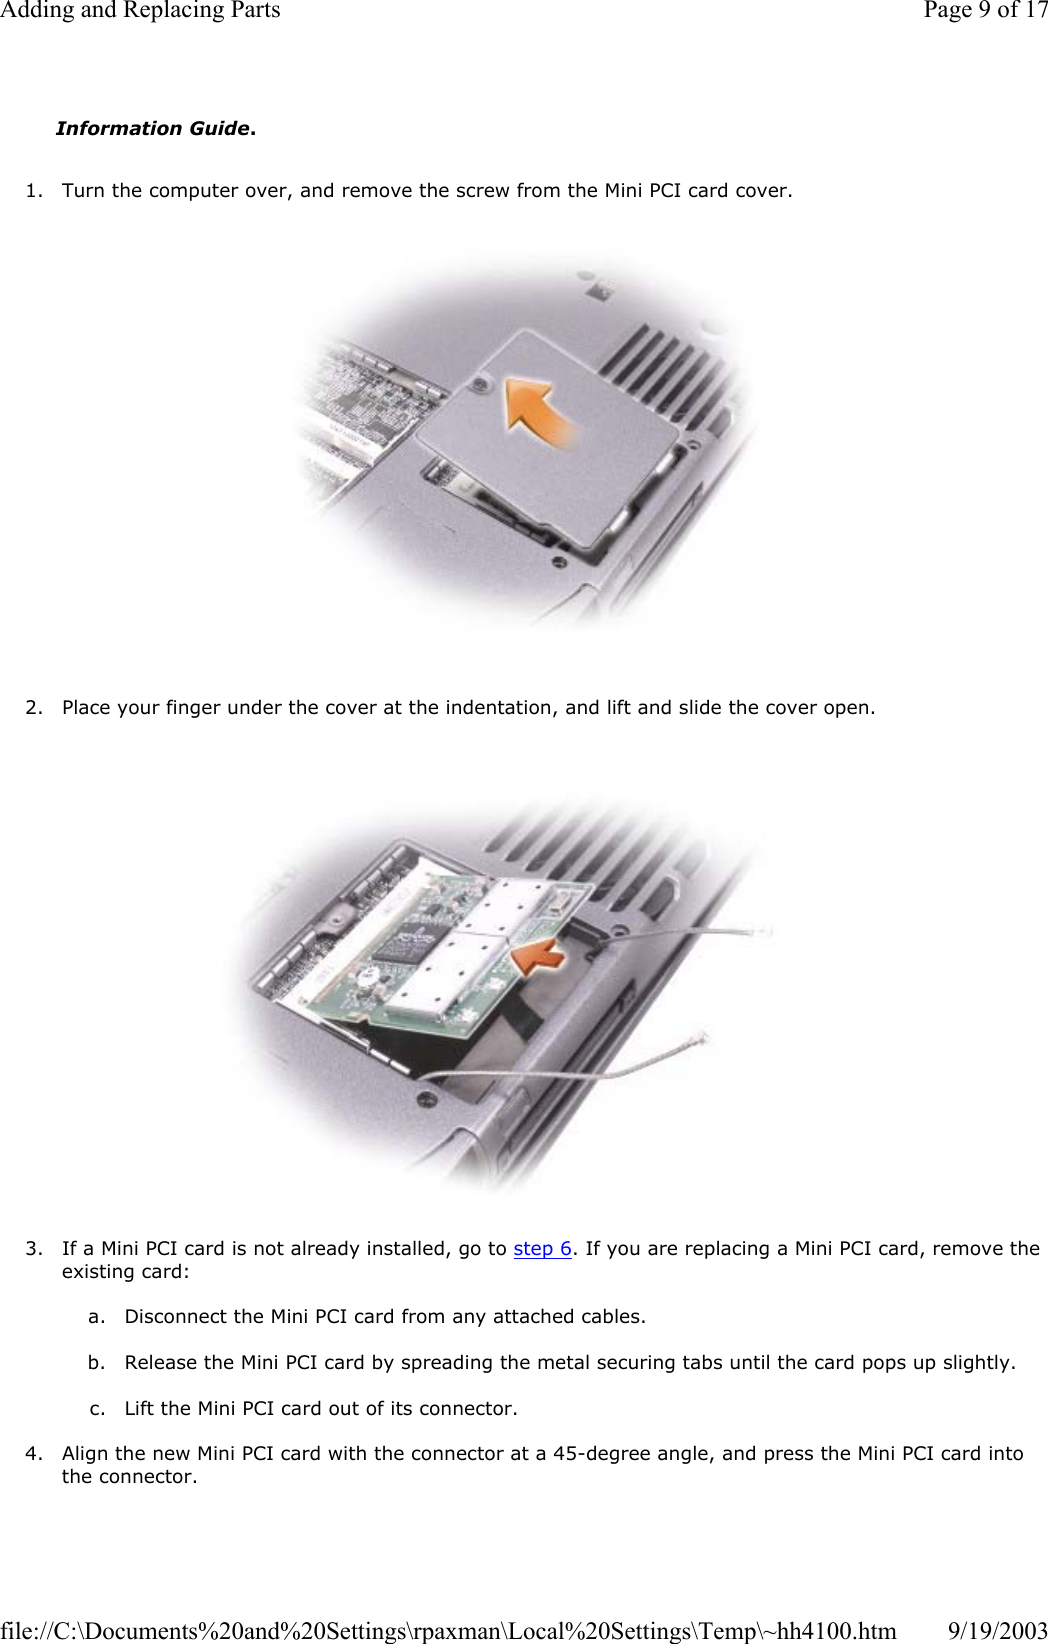 1. Turn the computer over, and remove the screw from the Mini PCI card cover.    2. Place your finger under the cover at the indentation, and lift and slide the cover open.    3. If a Mini PCI card is not already installed, go to step 6. If you are replacing a Mini PCI card, remove the existing card:  a. Disconnect the Mini PCI card from any attached cables.   b. Release the Mini PCI card by spreading the metal securing tabs until the card pops up slightly.  c. Lift the Mini PCI card out of its connector.  4. Align the new Mini PCI card with the connector at a 45-degree angle, and press the Mini PCI card into the connector.  Information Guide. Page 9 of 17Adding and Replacing Parts9/19/2003file://C:\Documents%20and%20Settings\rpaxman\Local%20Settings\Temp\~hh4100.htm